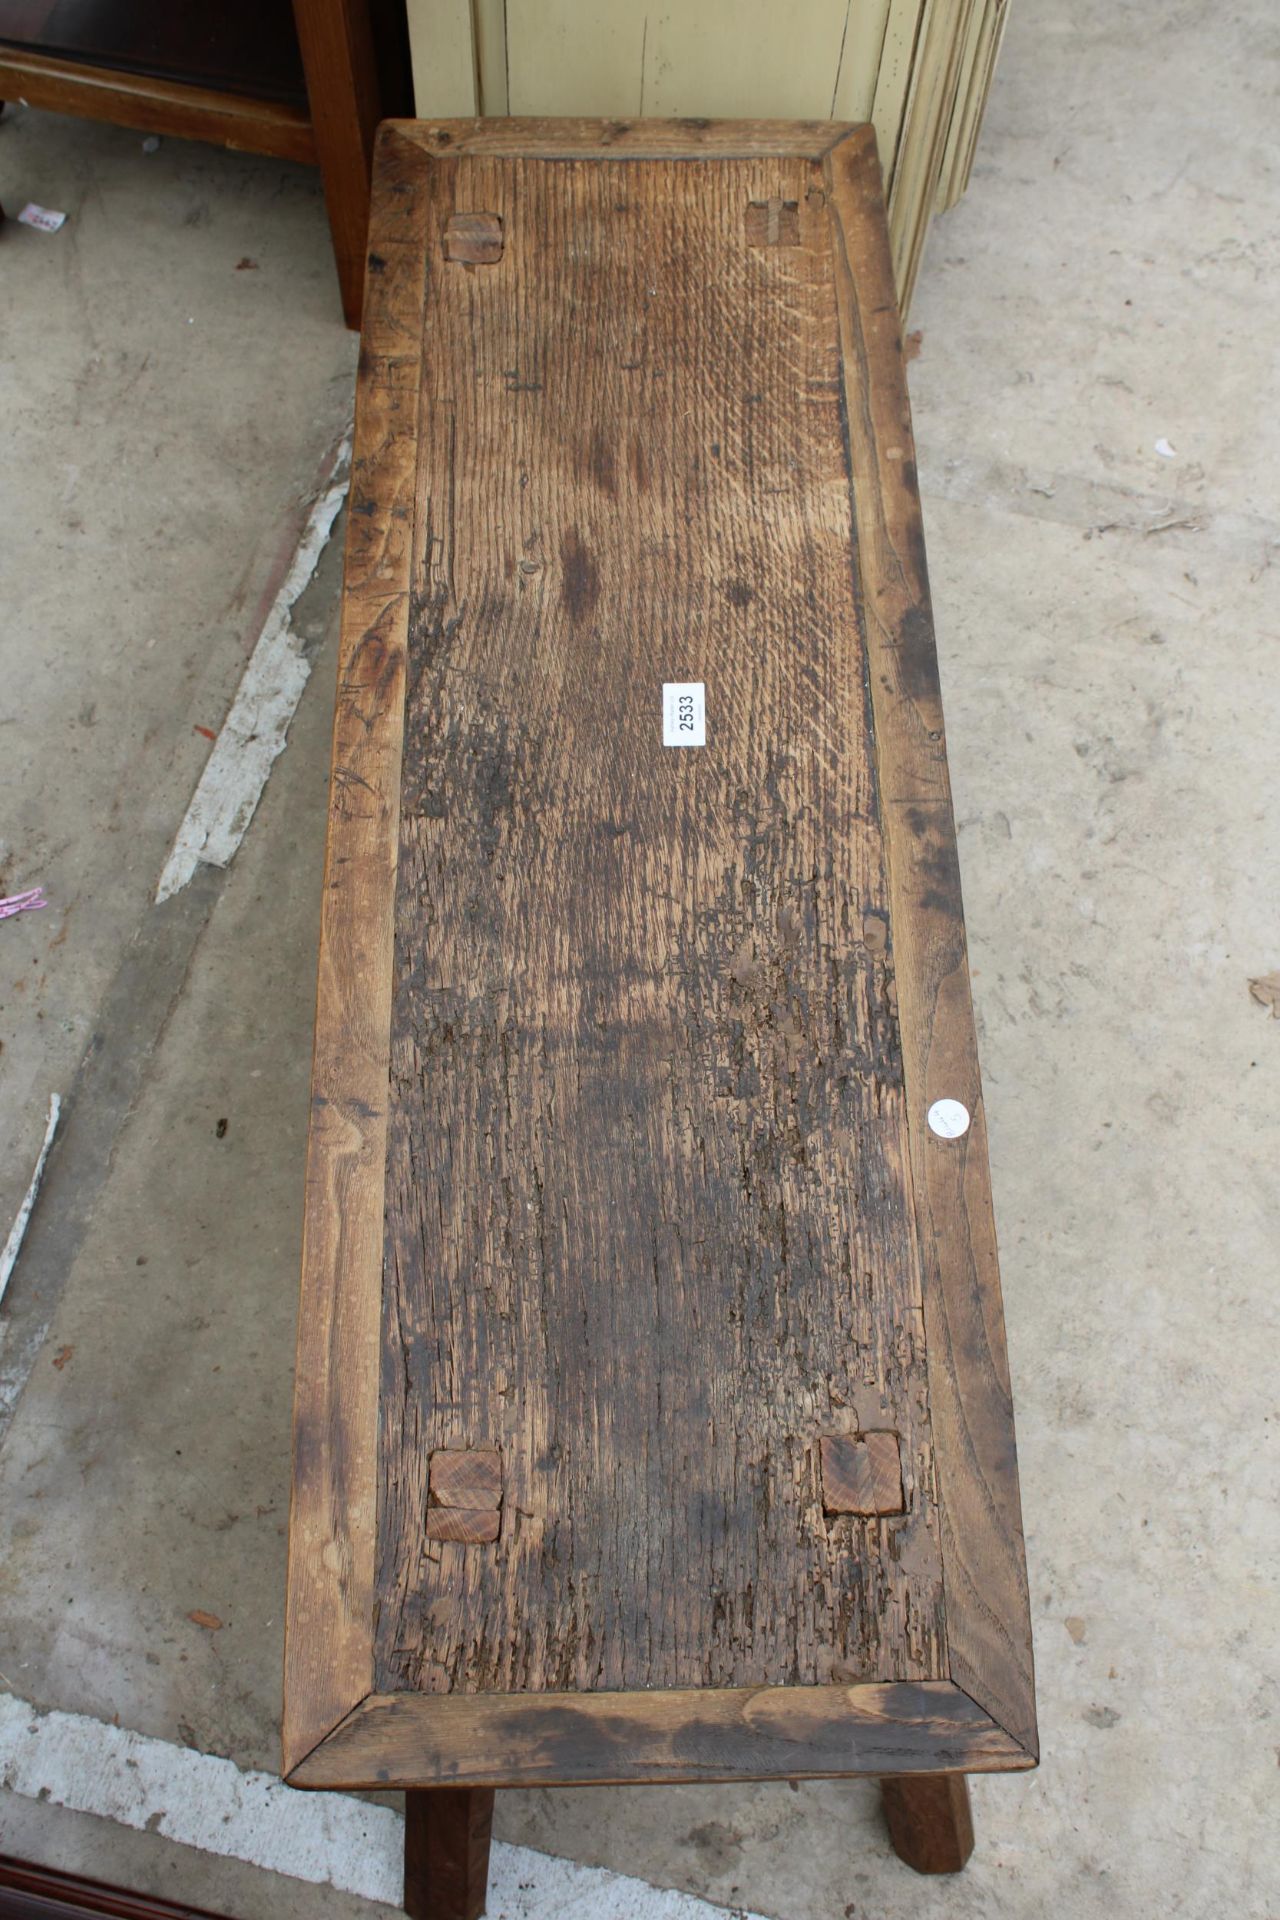 AN OAK PIG BENCH STYLE COFFEE TABLE 37" X 12" - Image 3 of 3